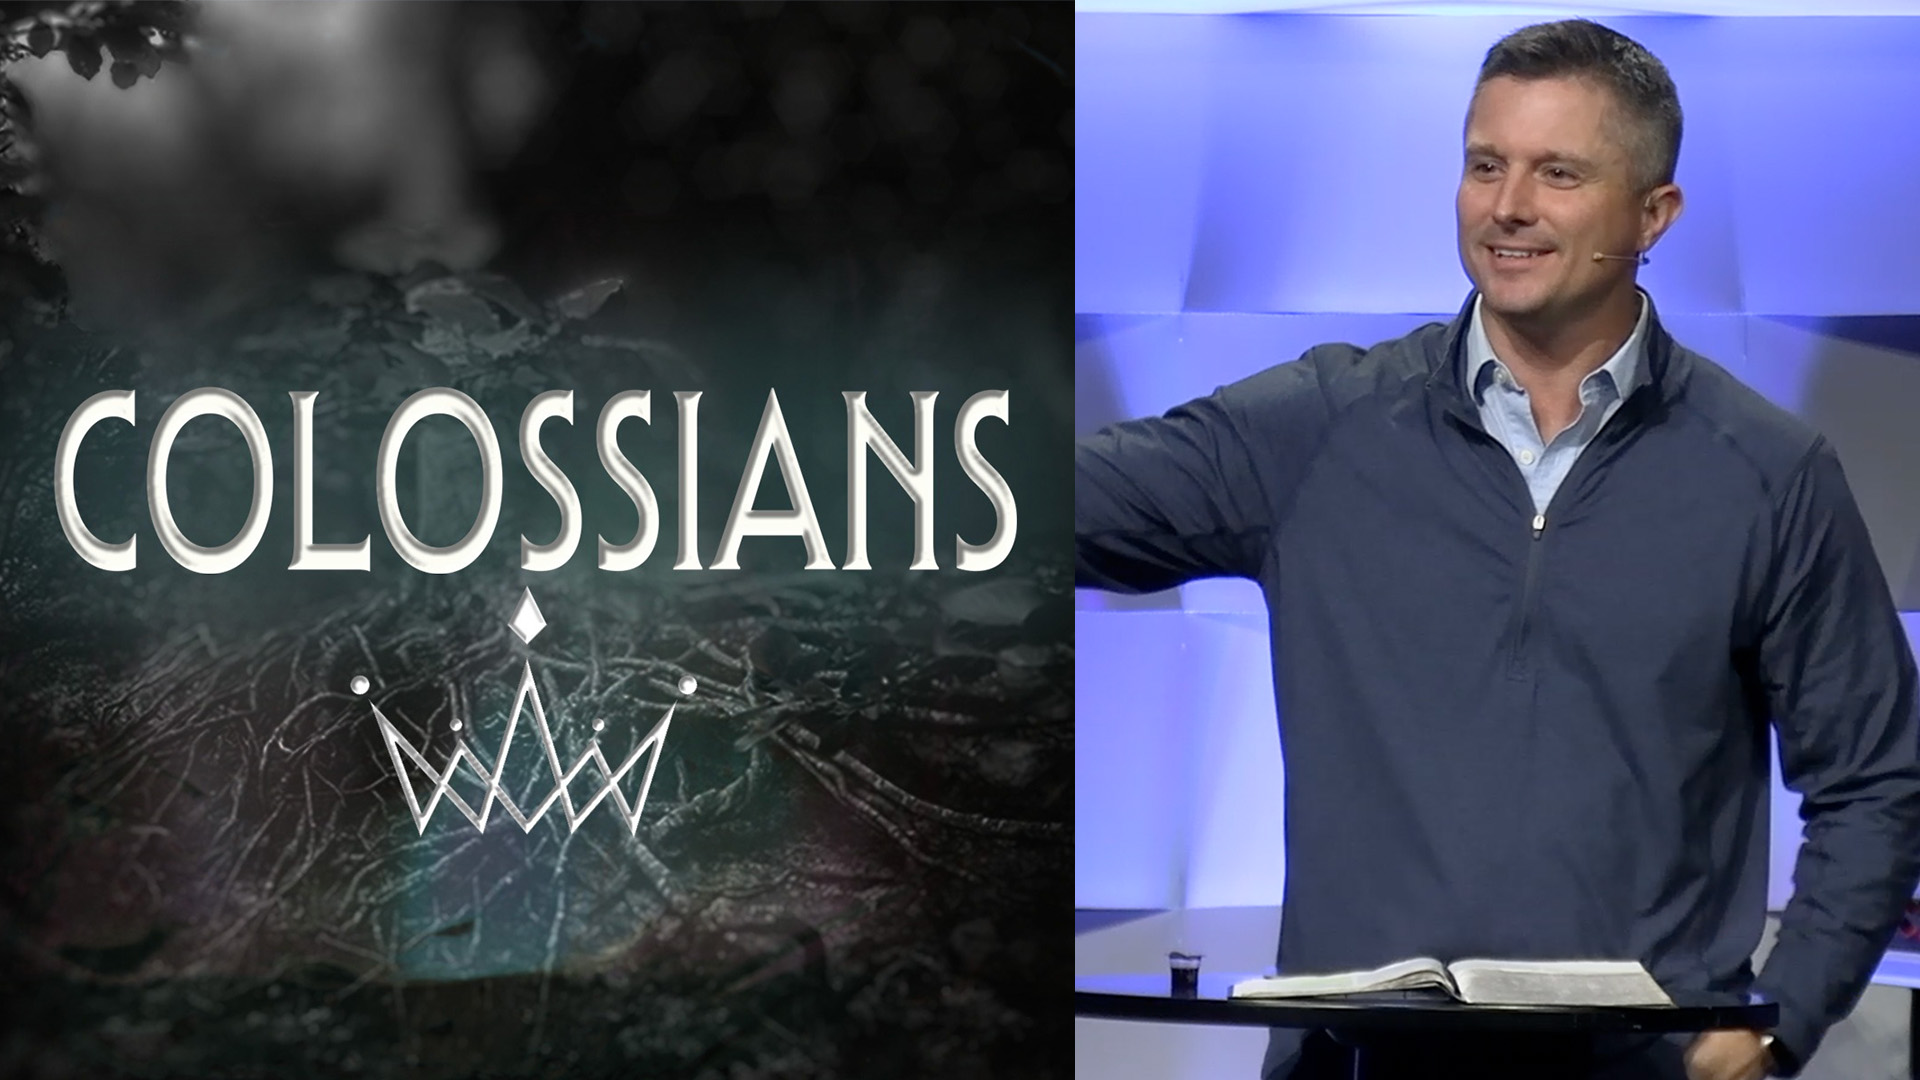 Colossians - Week Two